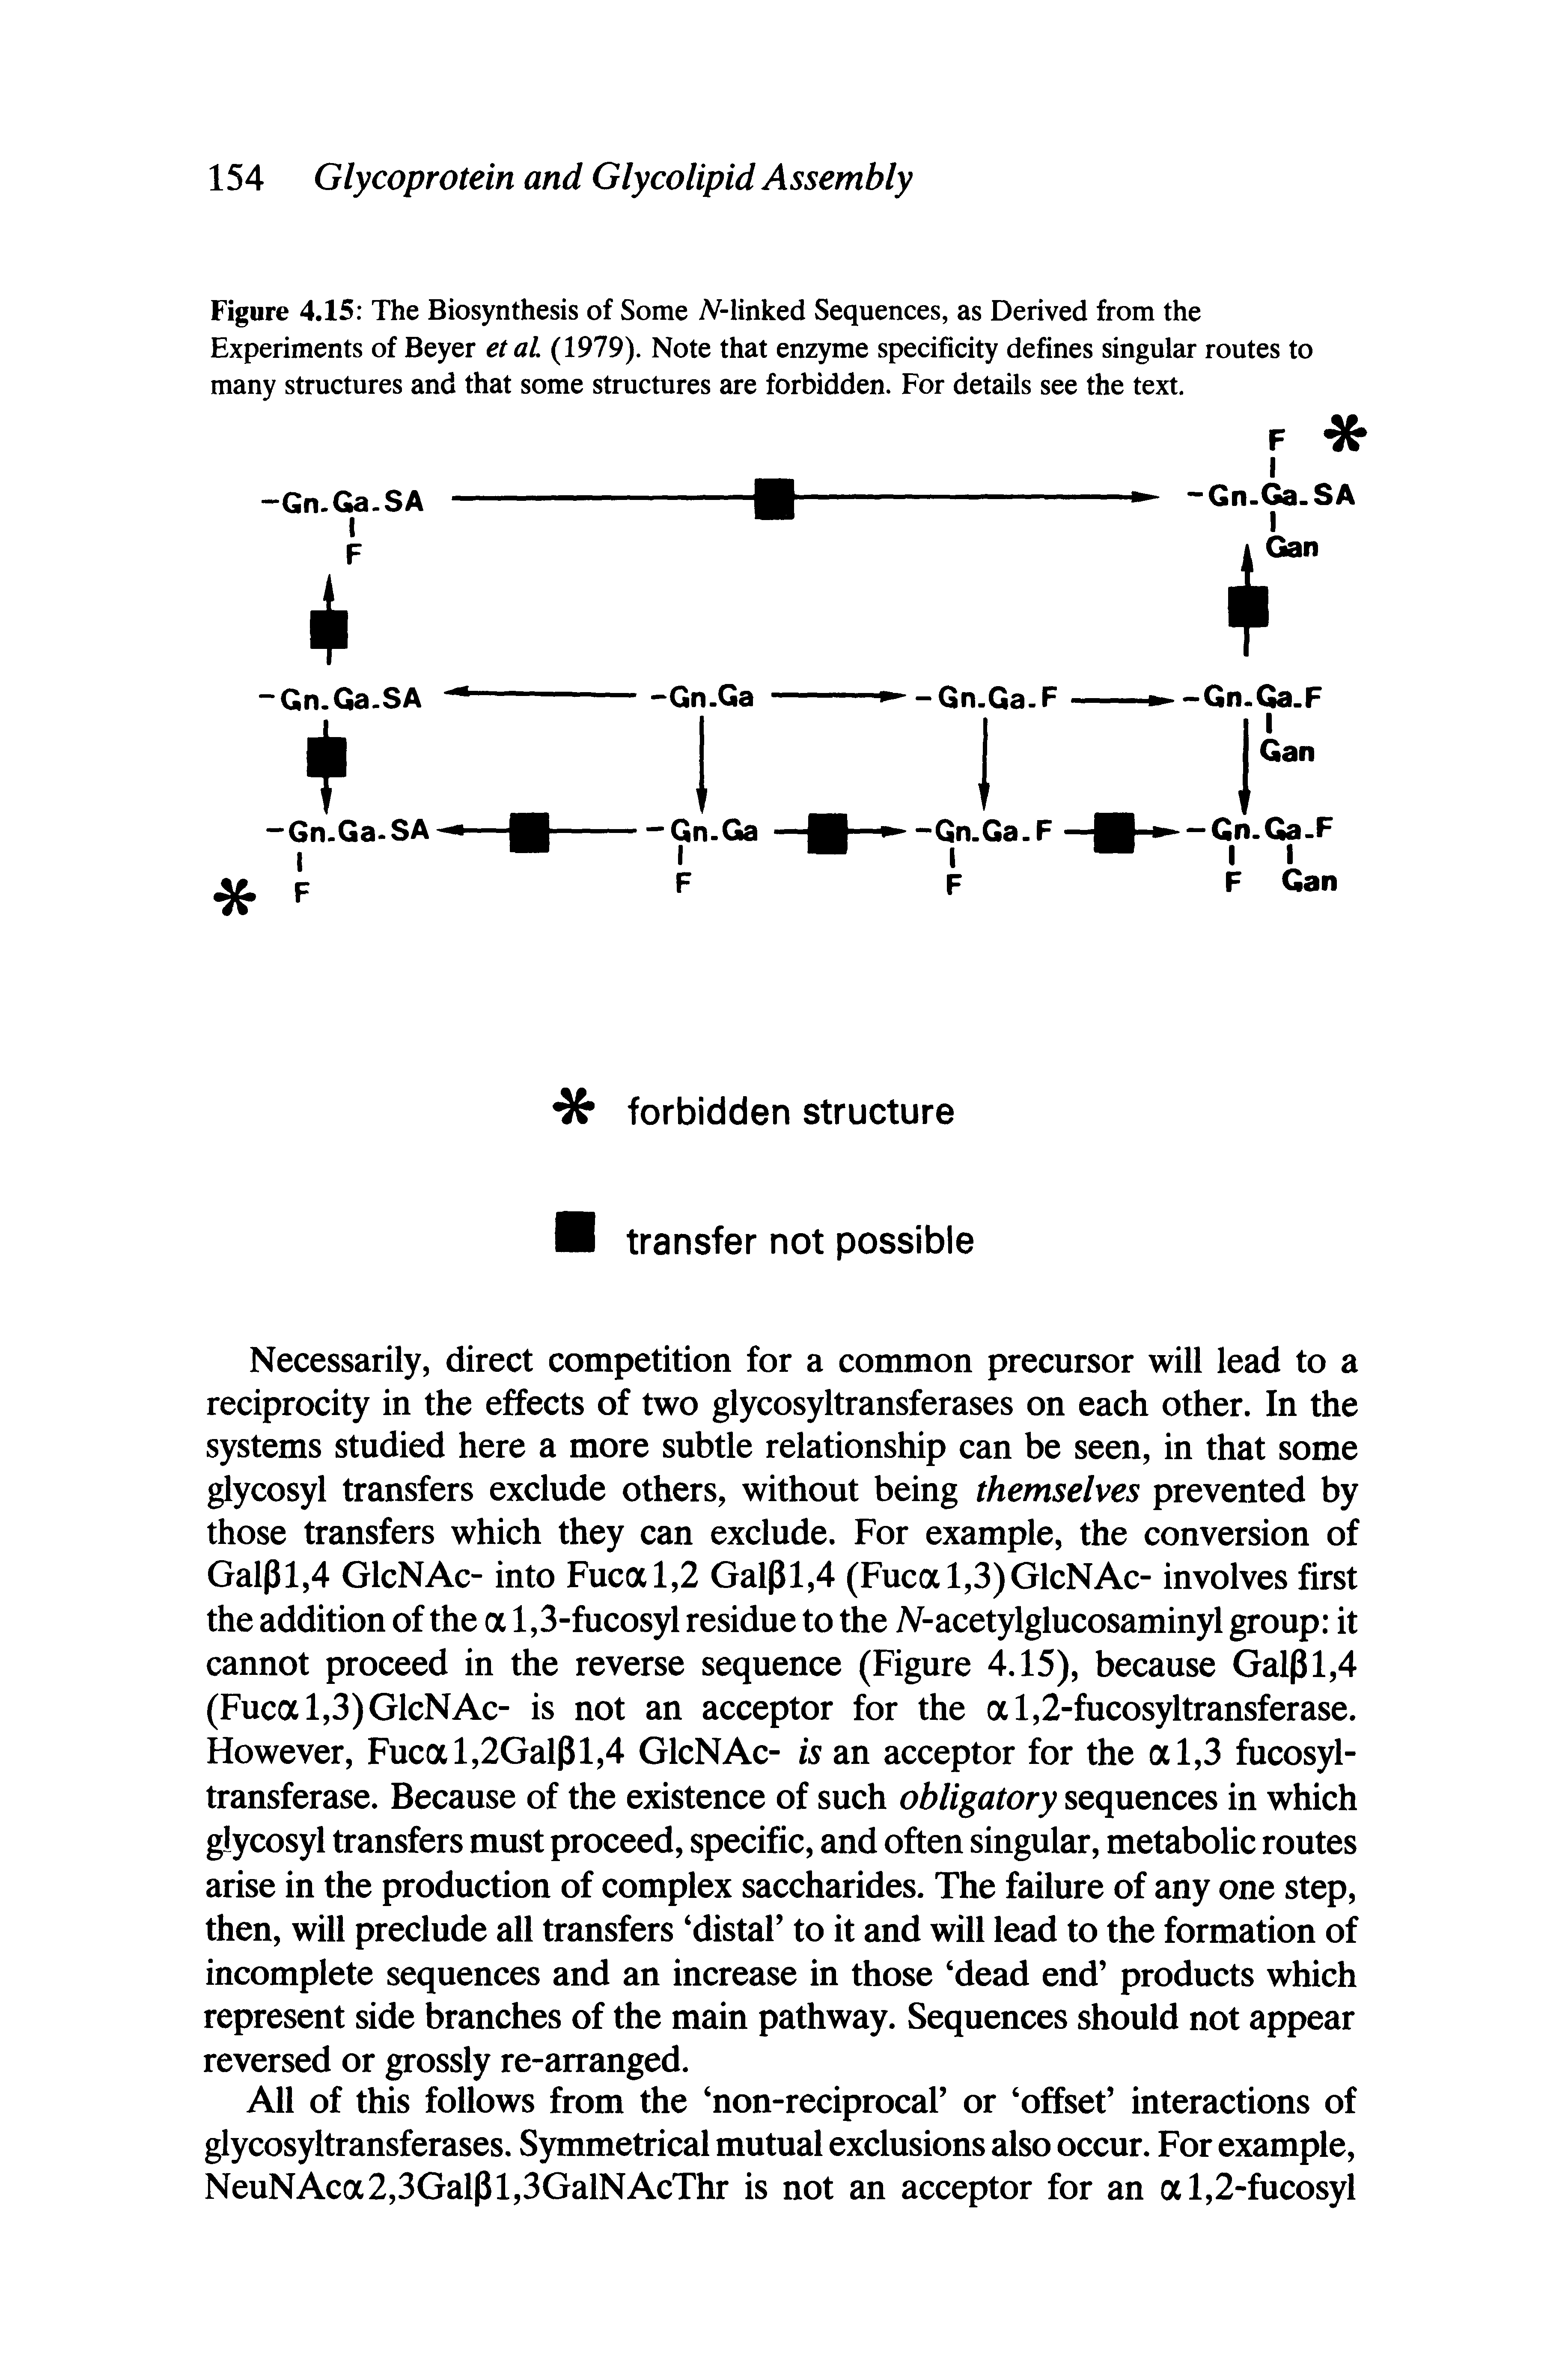 Figure 4.15 The Biosynthesis of Some A -linked Sequences, as Derived from the Experiments of Beyer etaL (1979). Note that enzyme specificity defines singular routes to many structures and that some structures are forbidden. For details see the text.